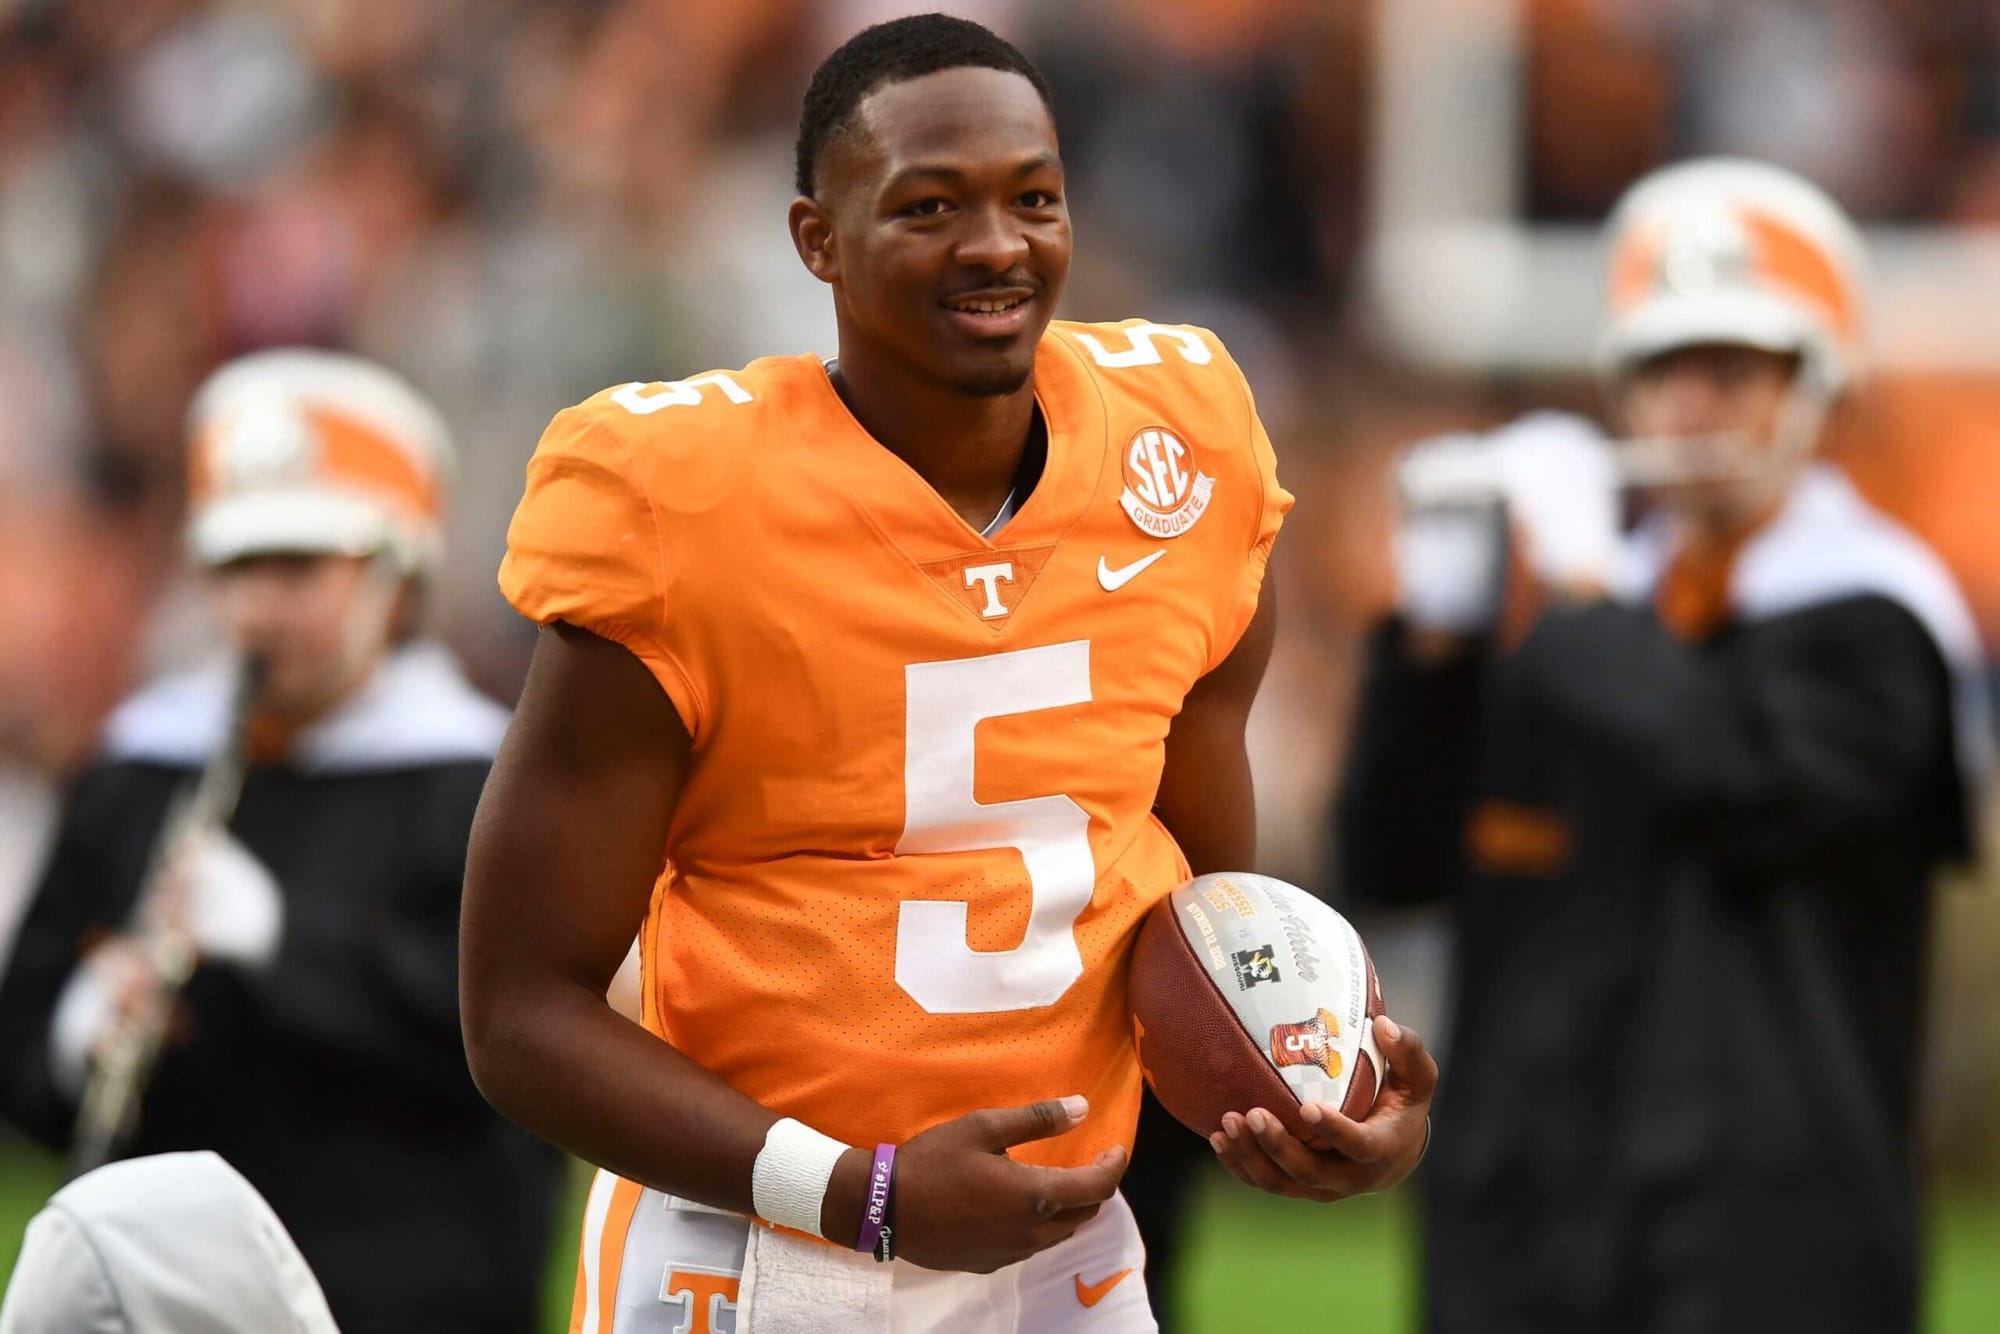 Inside The Numbers: Vols at the 2023 NFL Combine - University of Tennessee  Athletics